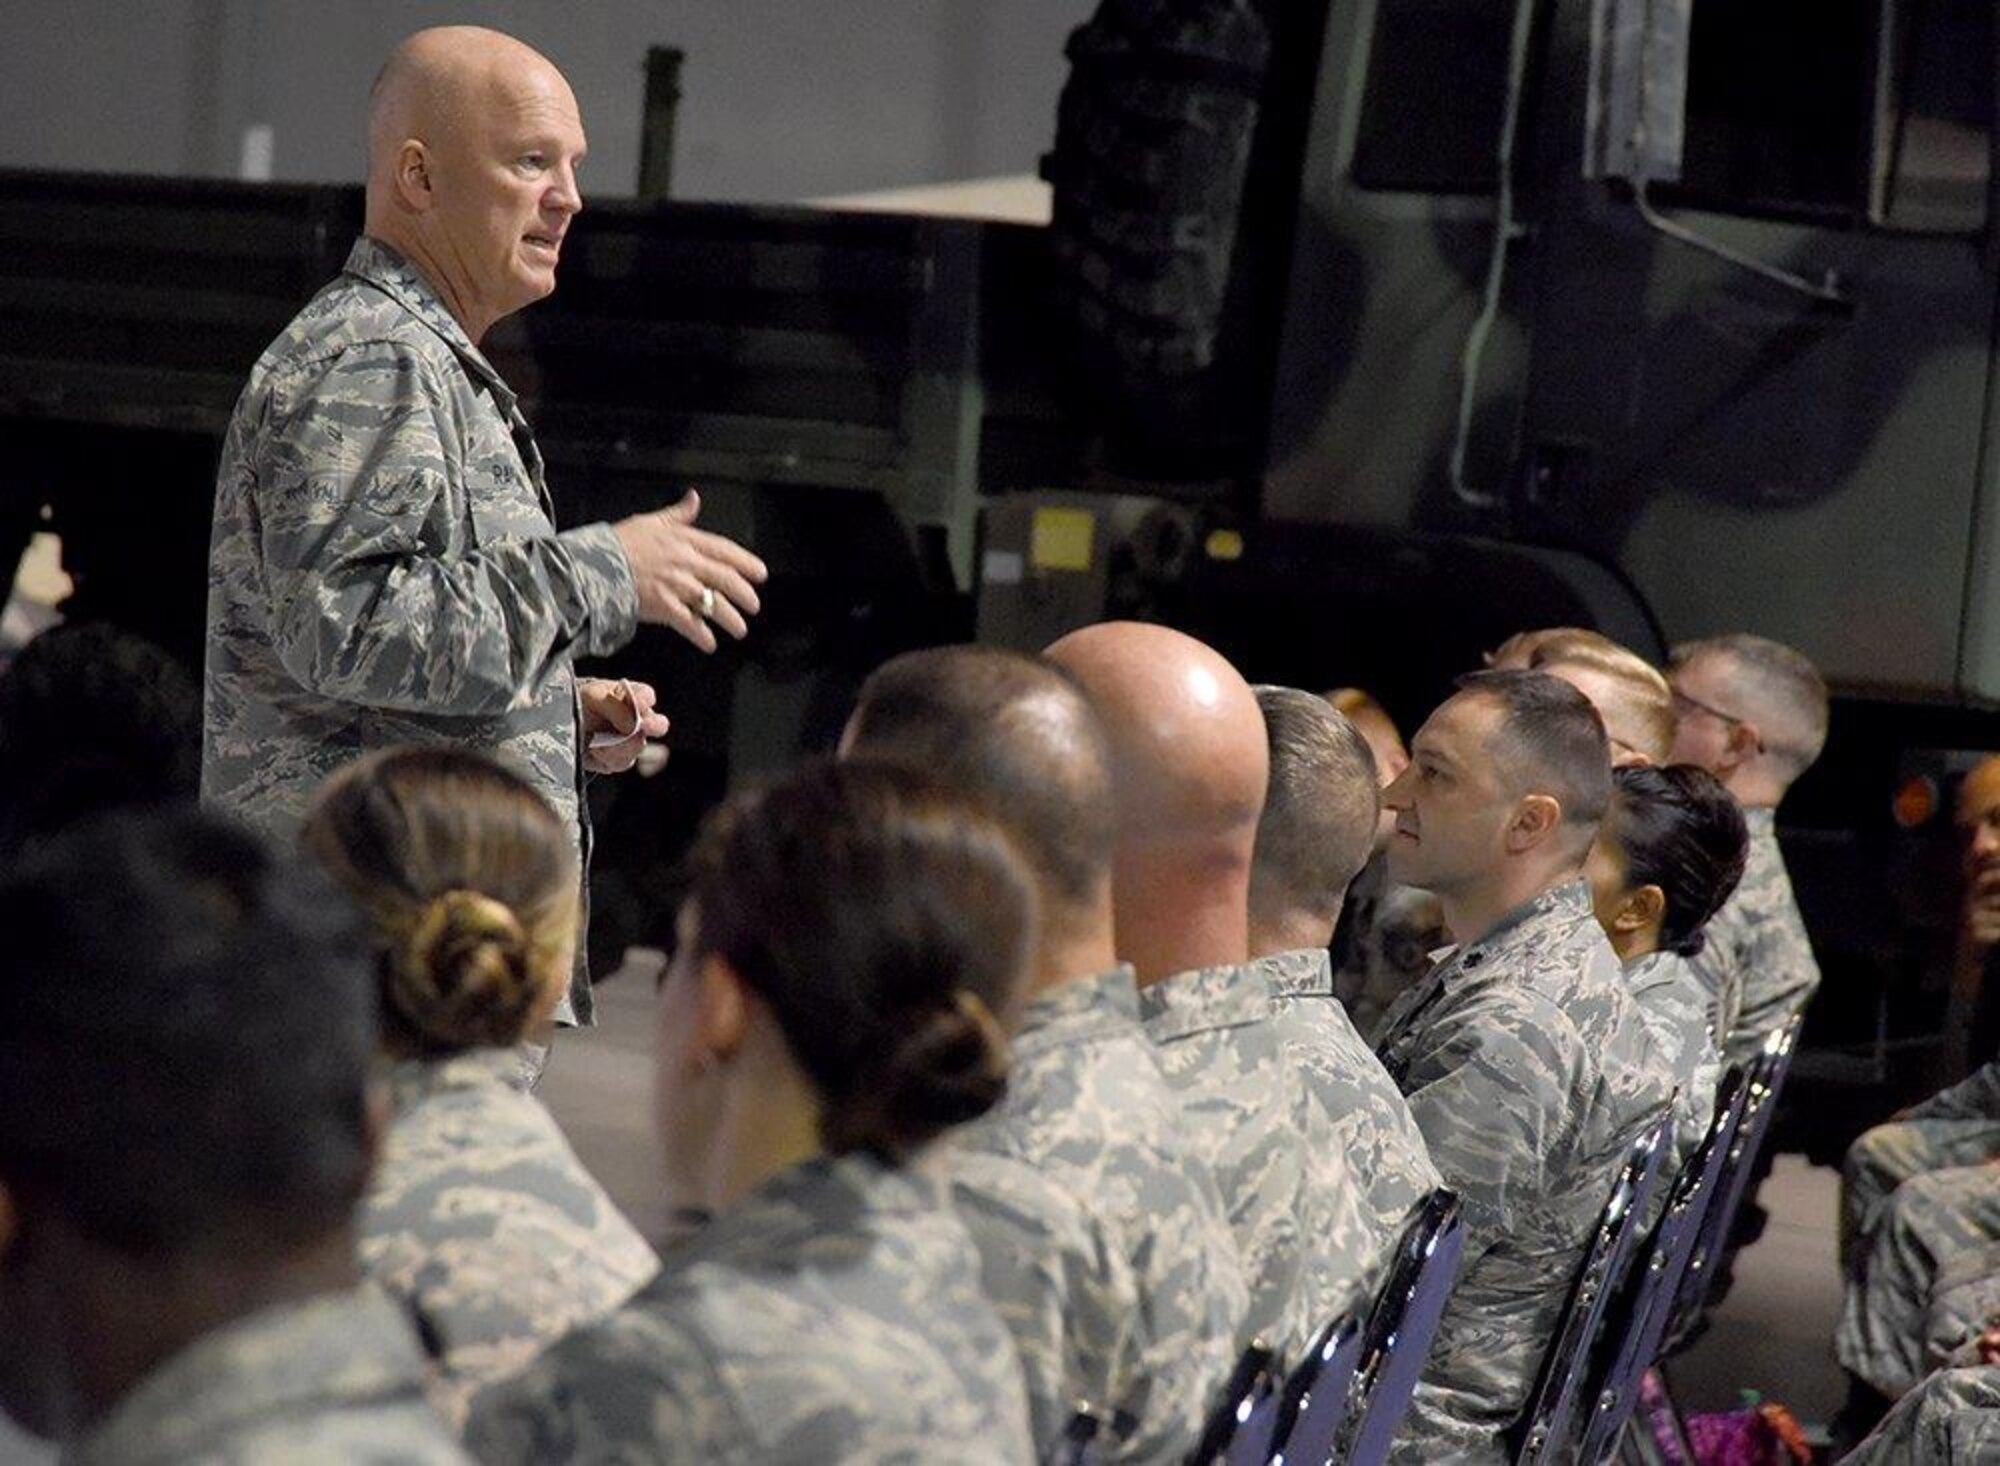 Gen. Jay Raymond, Air Force Space Command commander, conducts an all call with the the 5th Combat Communications Group at the Museum of Aviation at Robins Air Force Base, Ga. April 24, 2017. During the general's visit, he toured the 5th CCG, the Warner Robins Air Logistics Complex, hosted an all call with the 5th Mob and attended a social with local community leaders at the Museum of Aviation. (U.S. Air Force photo/Ed Aspera)